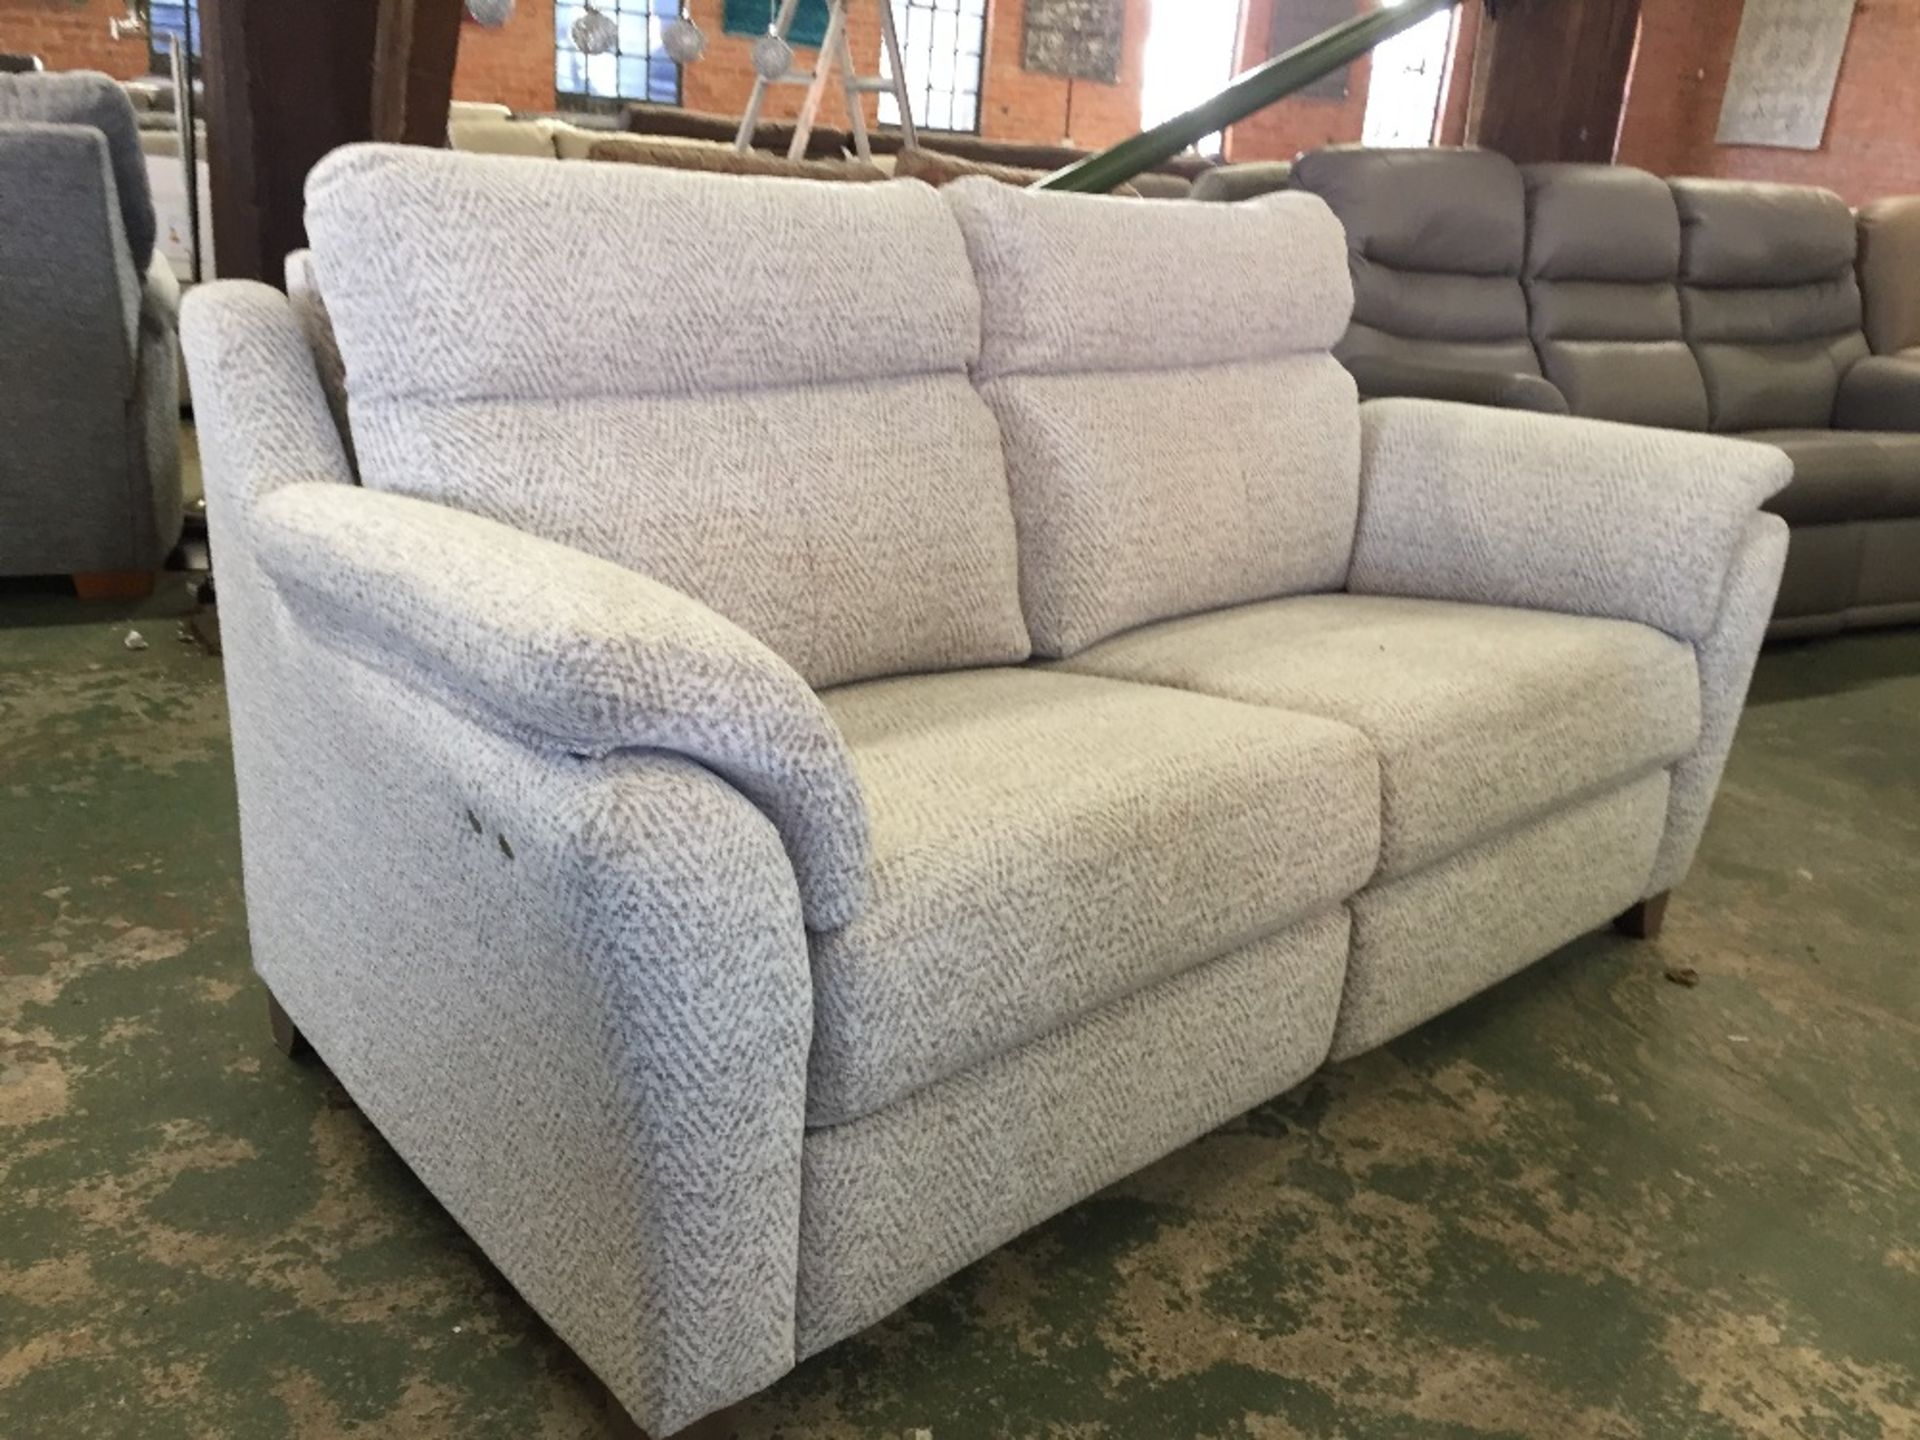 NATURAL PATTERNED ELECTRIC RECLINING 3 SEATER SOFA